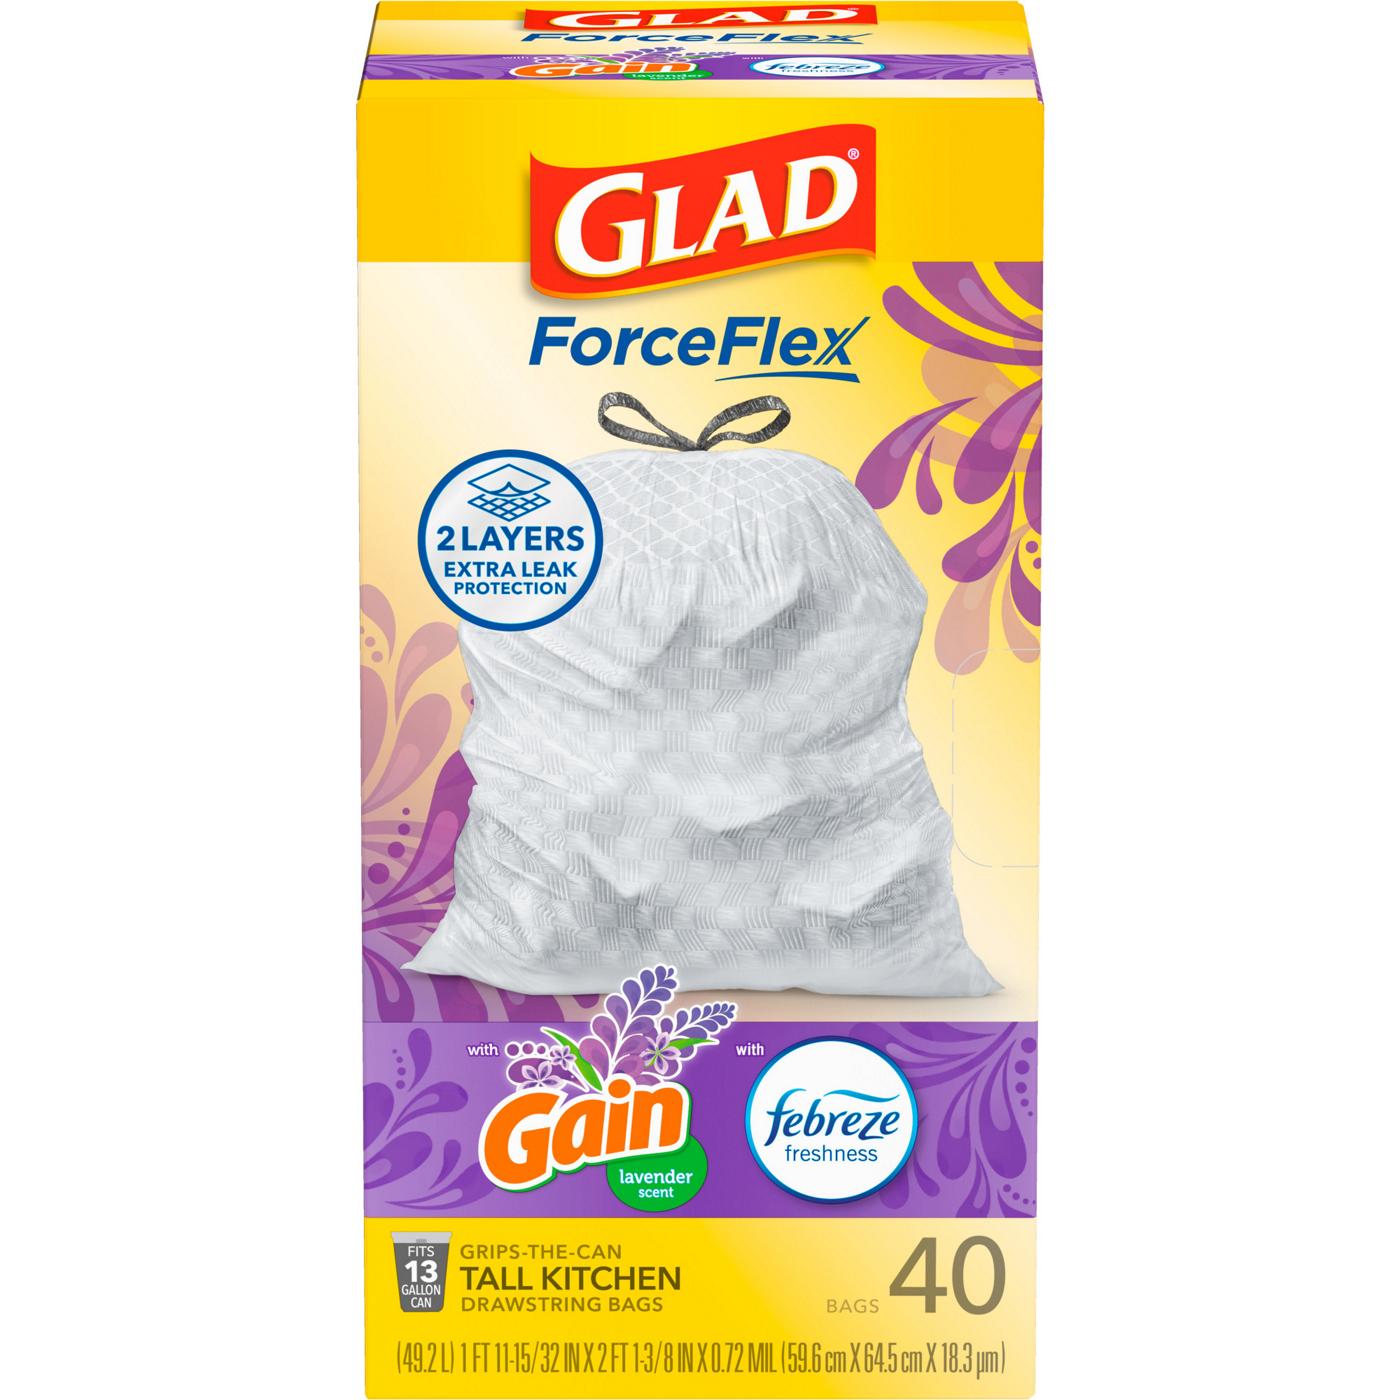 Glad ForceFlex Tall Kitchen Drawstring Trash Bags, 13 Gallon - Gain Lavender Scent with Febreeze Freshness; image 1 of 9